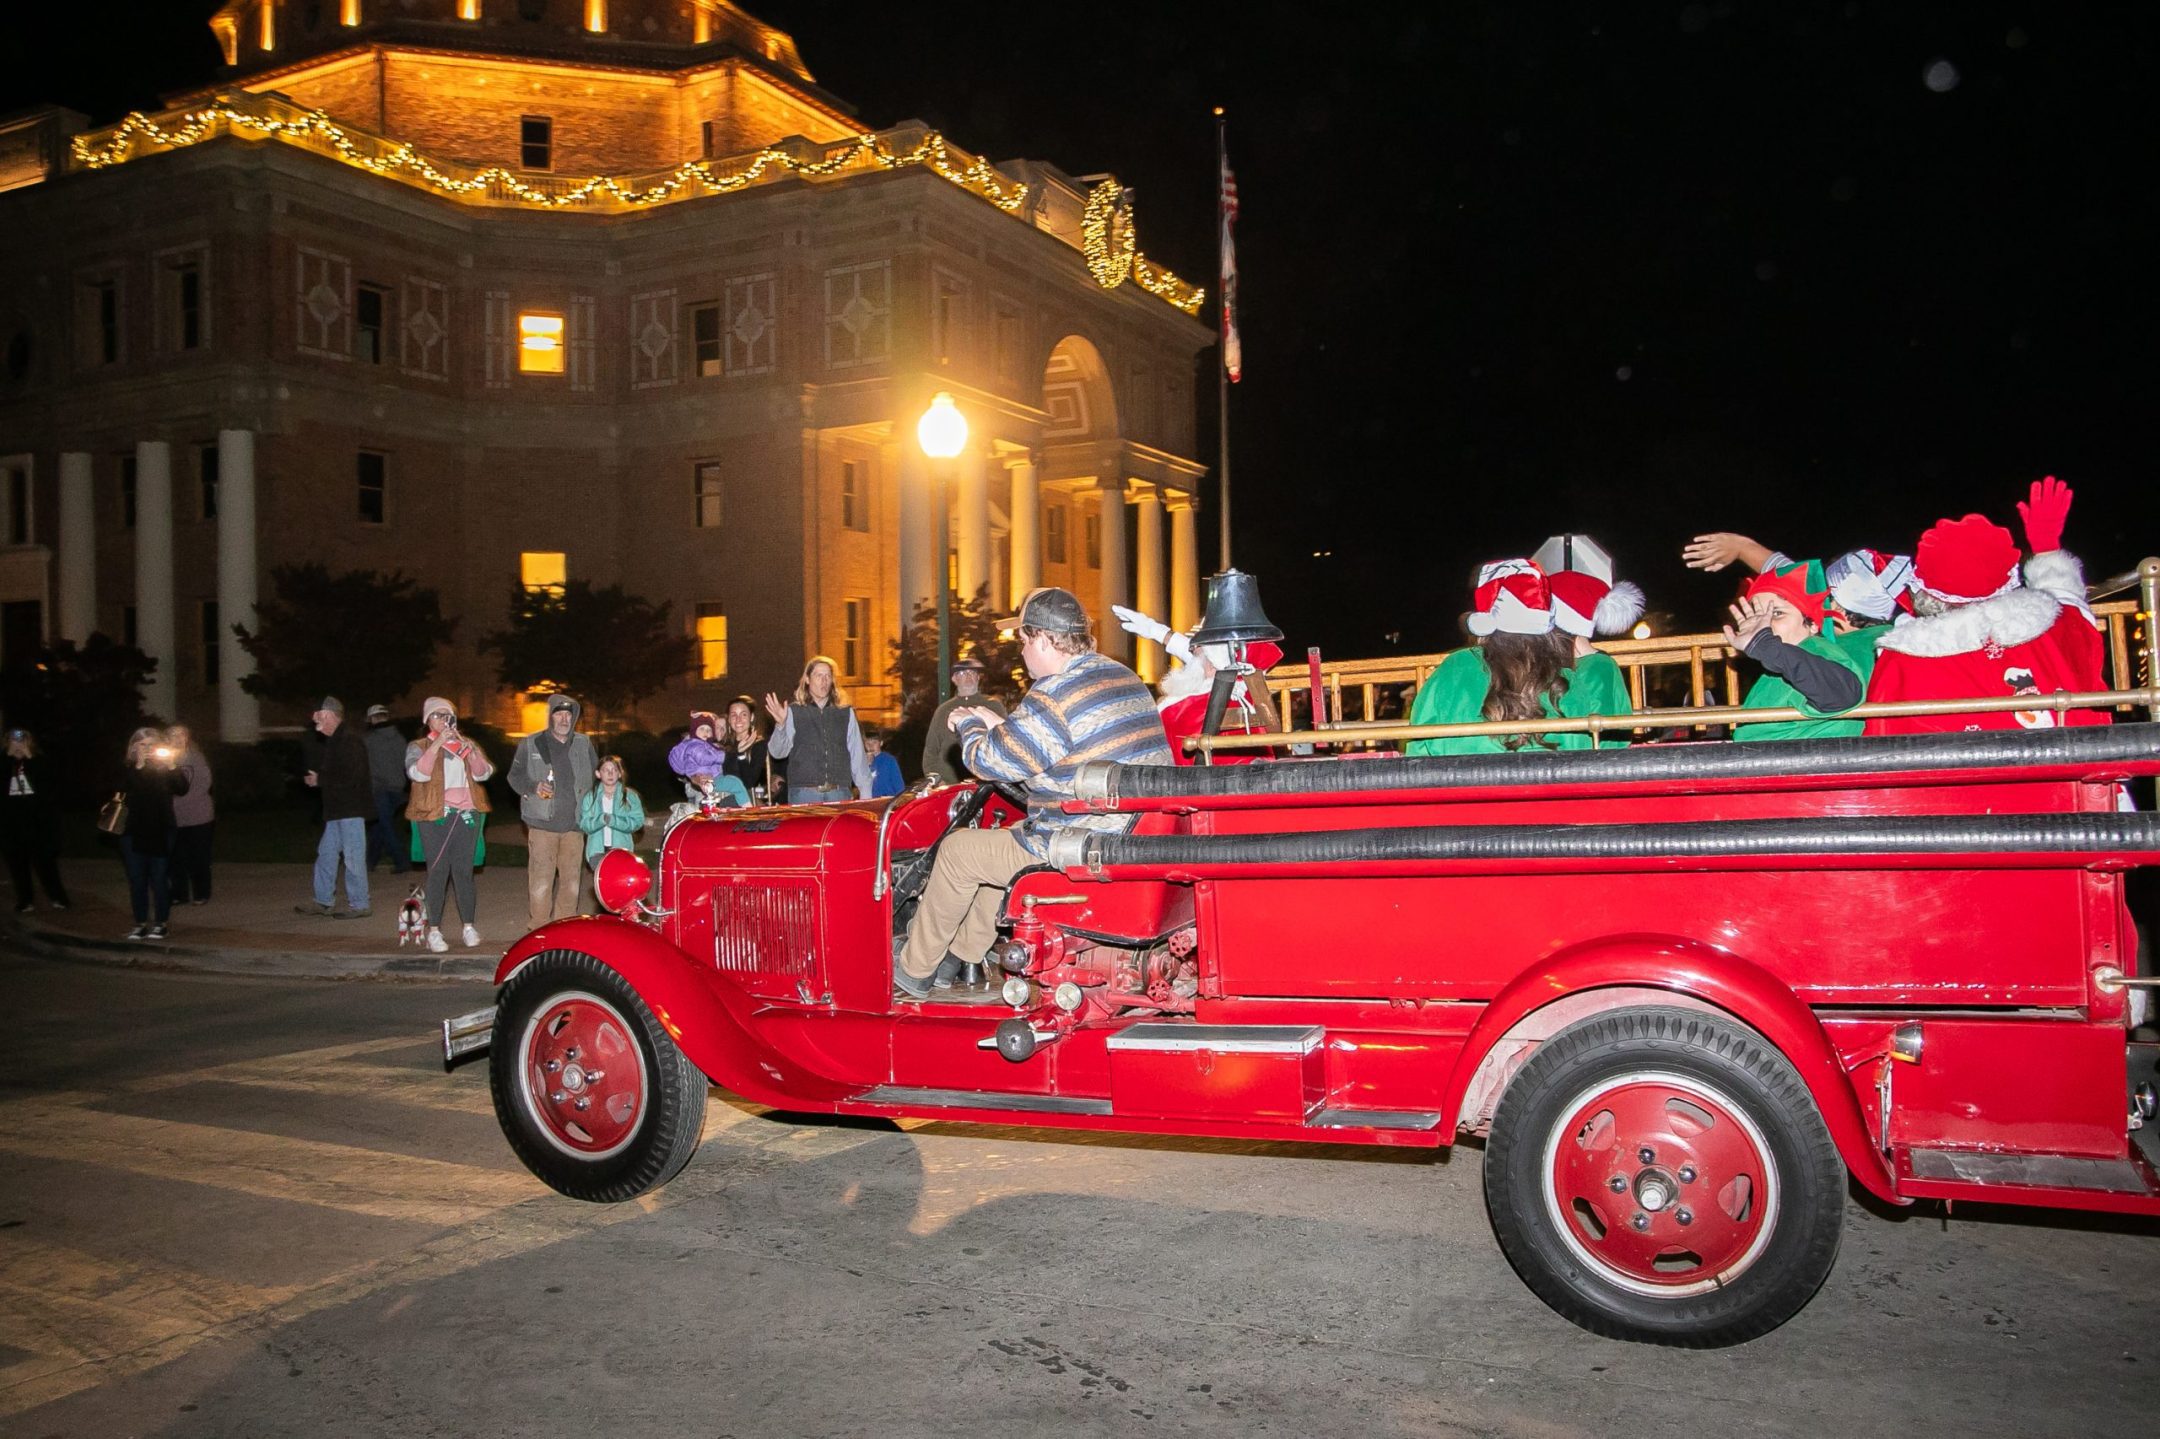 Atascadero starts off December by lighting up City Hall and Sunken